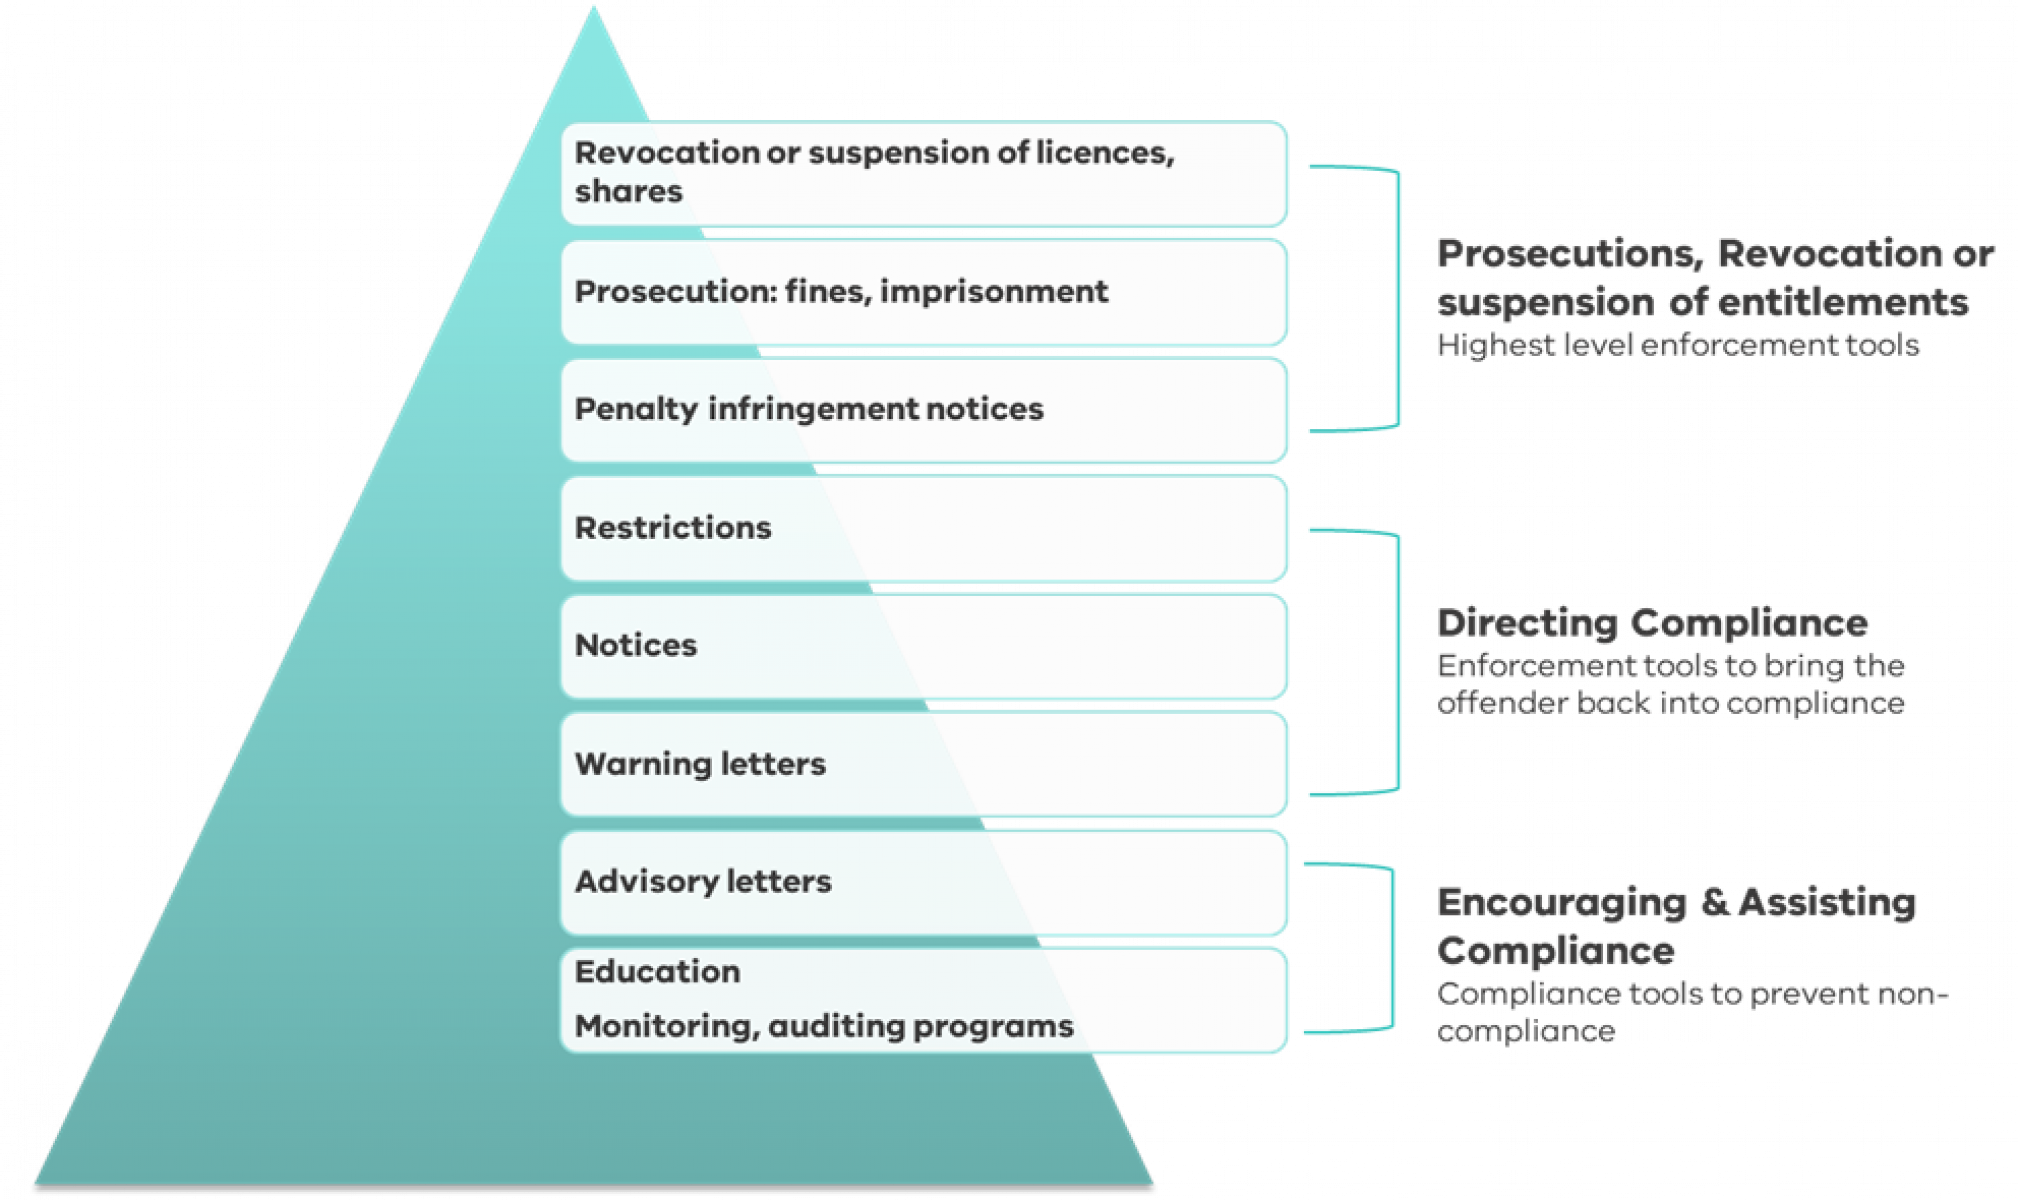 Graphic showing the escalation of enforcement actions. At the bottom of a pyramid sits advisory letters and education, monitoring and auditing programs that encourage and assist compliance. Higher up the pyramid are restrictions, notices and warning letters aimed at directing compliance. At the top of the pyramid sits revocation or suspension of licences and shares, prosecution, fines and imprisonment, and penalty infringement notices as the highest level of enforcement tools.